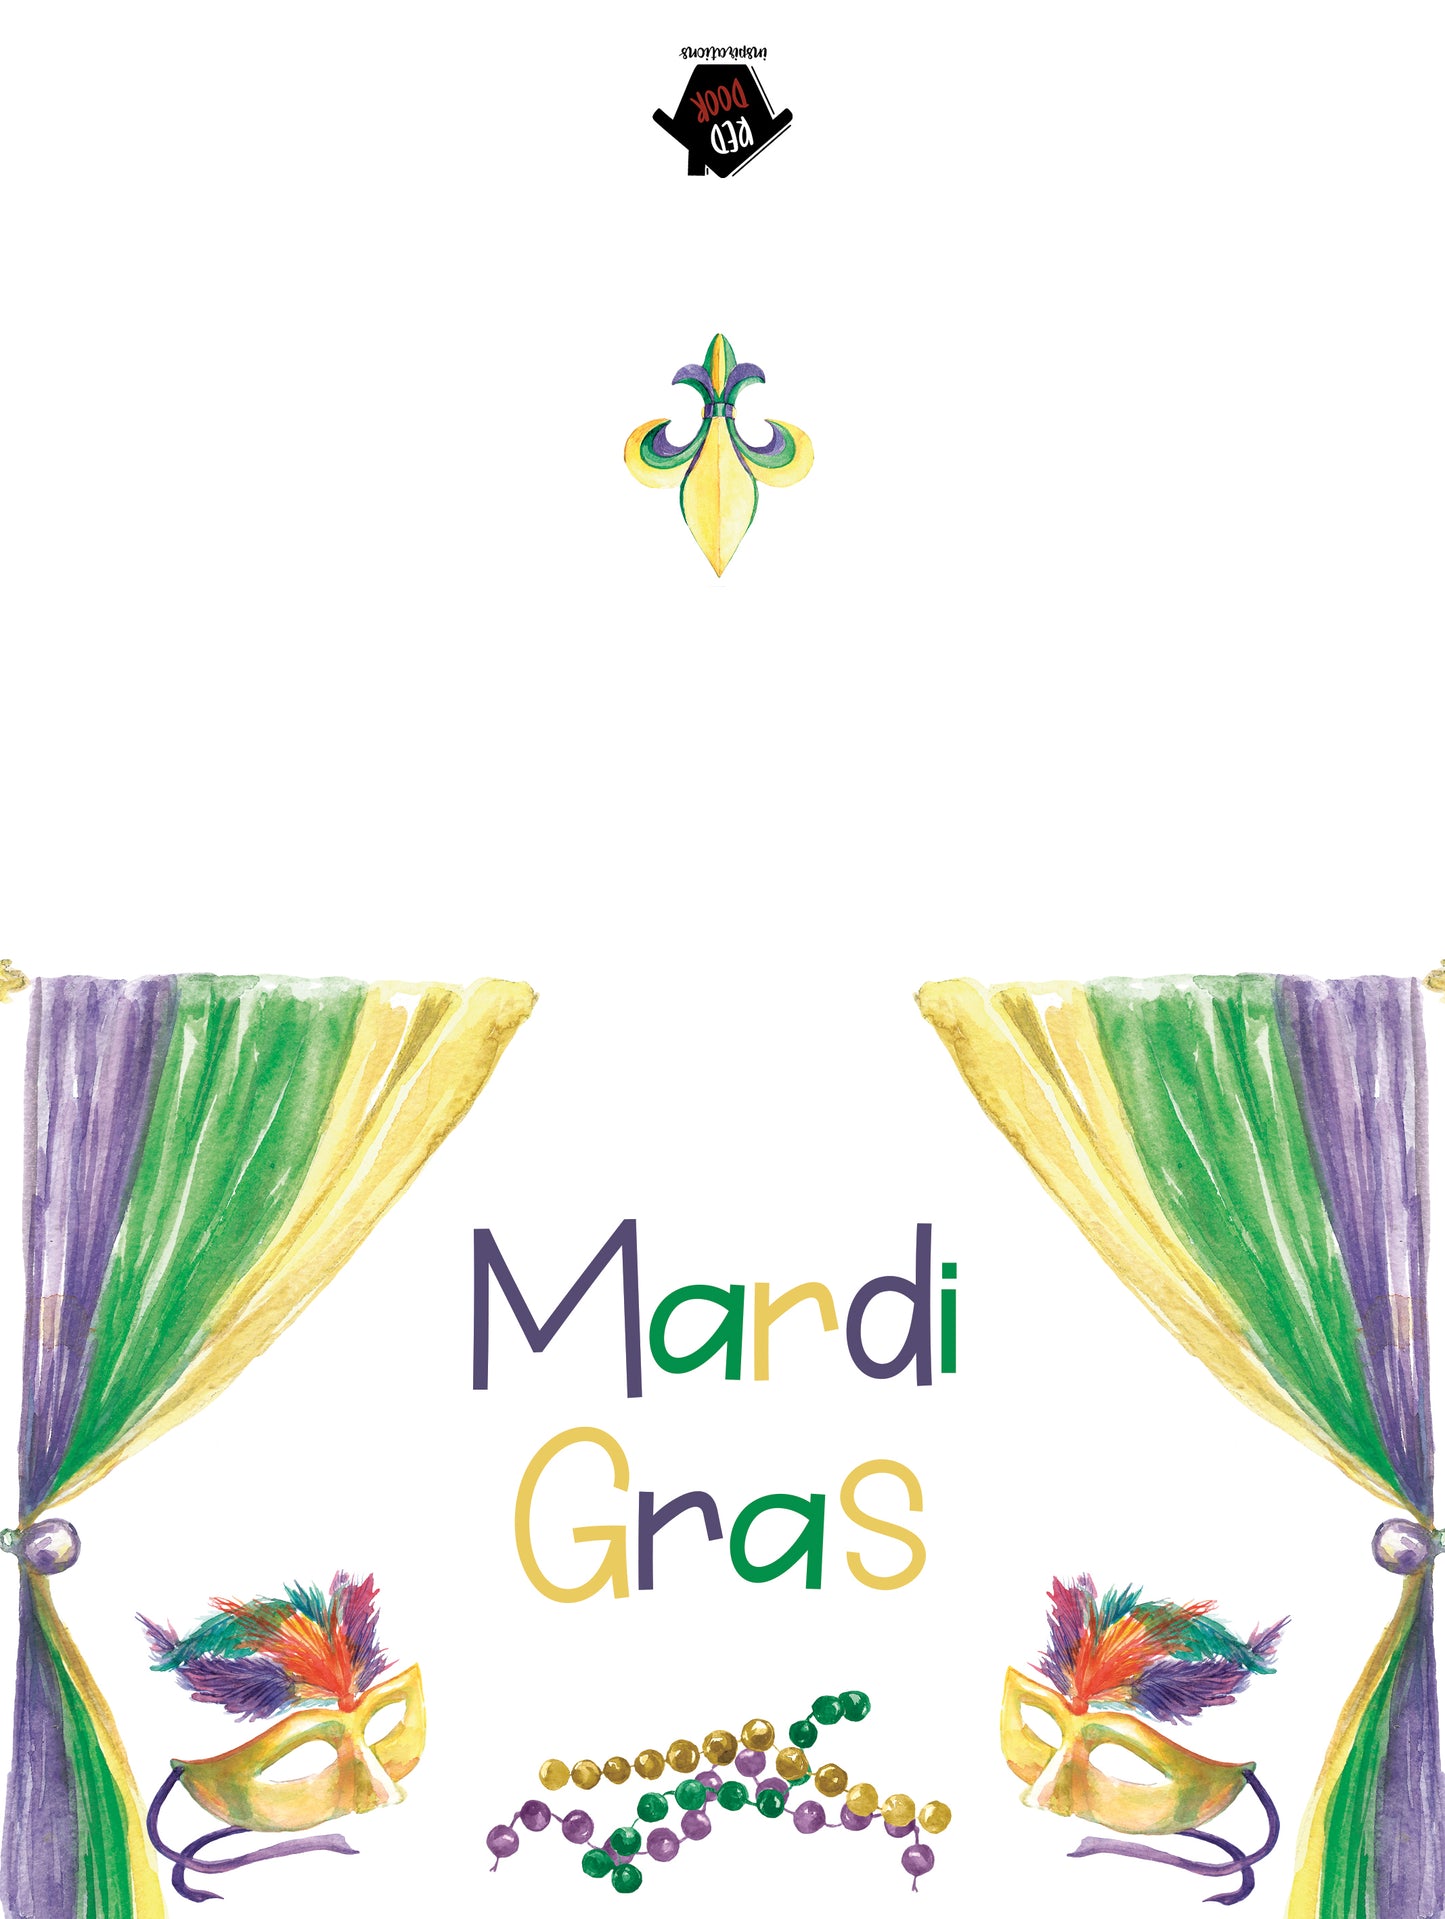 Mardi Gras Greeting Card - Includes 25 cards